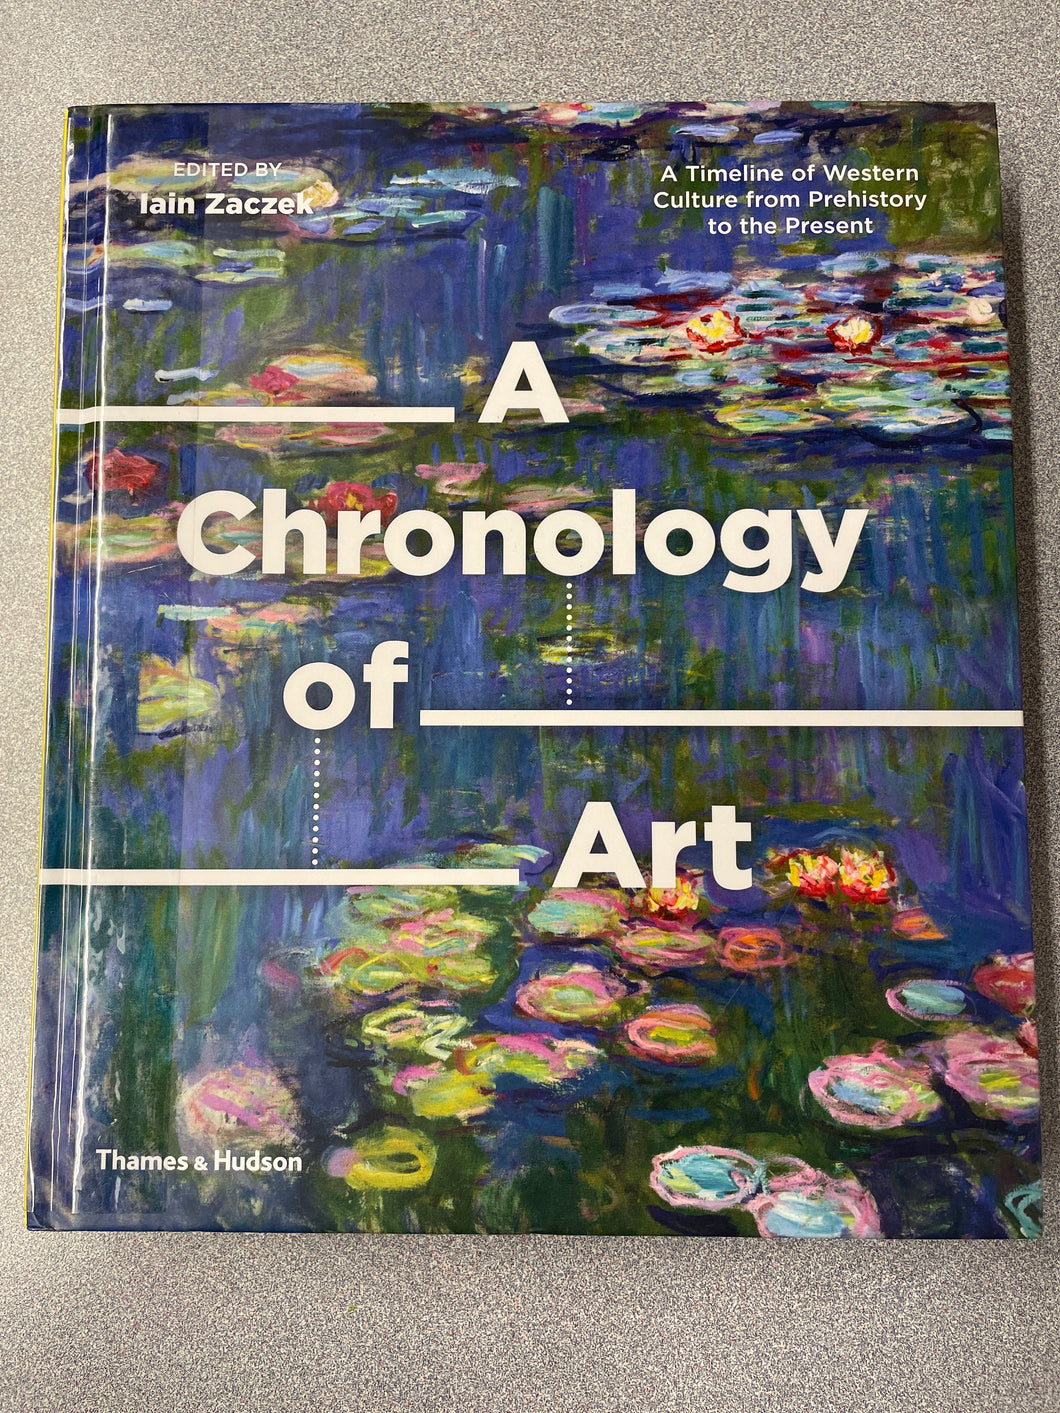 A Chronology of Art: a Timeline of Western Culture From Prehistory to the Present, Zaczek, Iain, ed. [2018] A 3/24